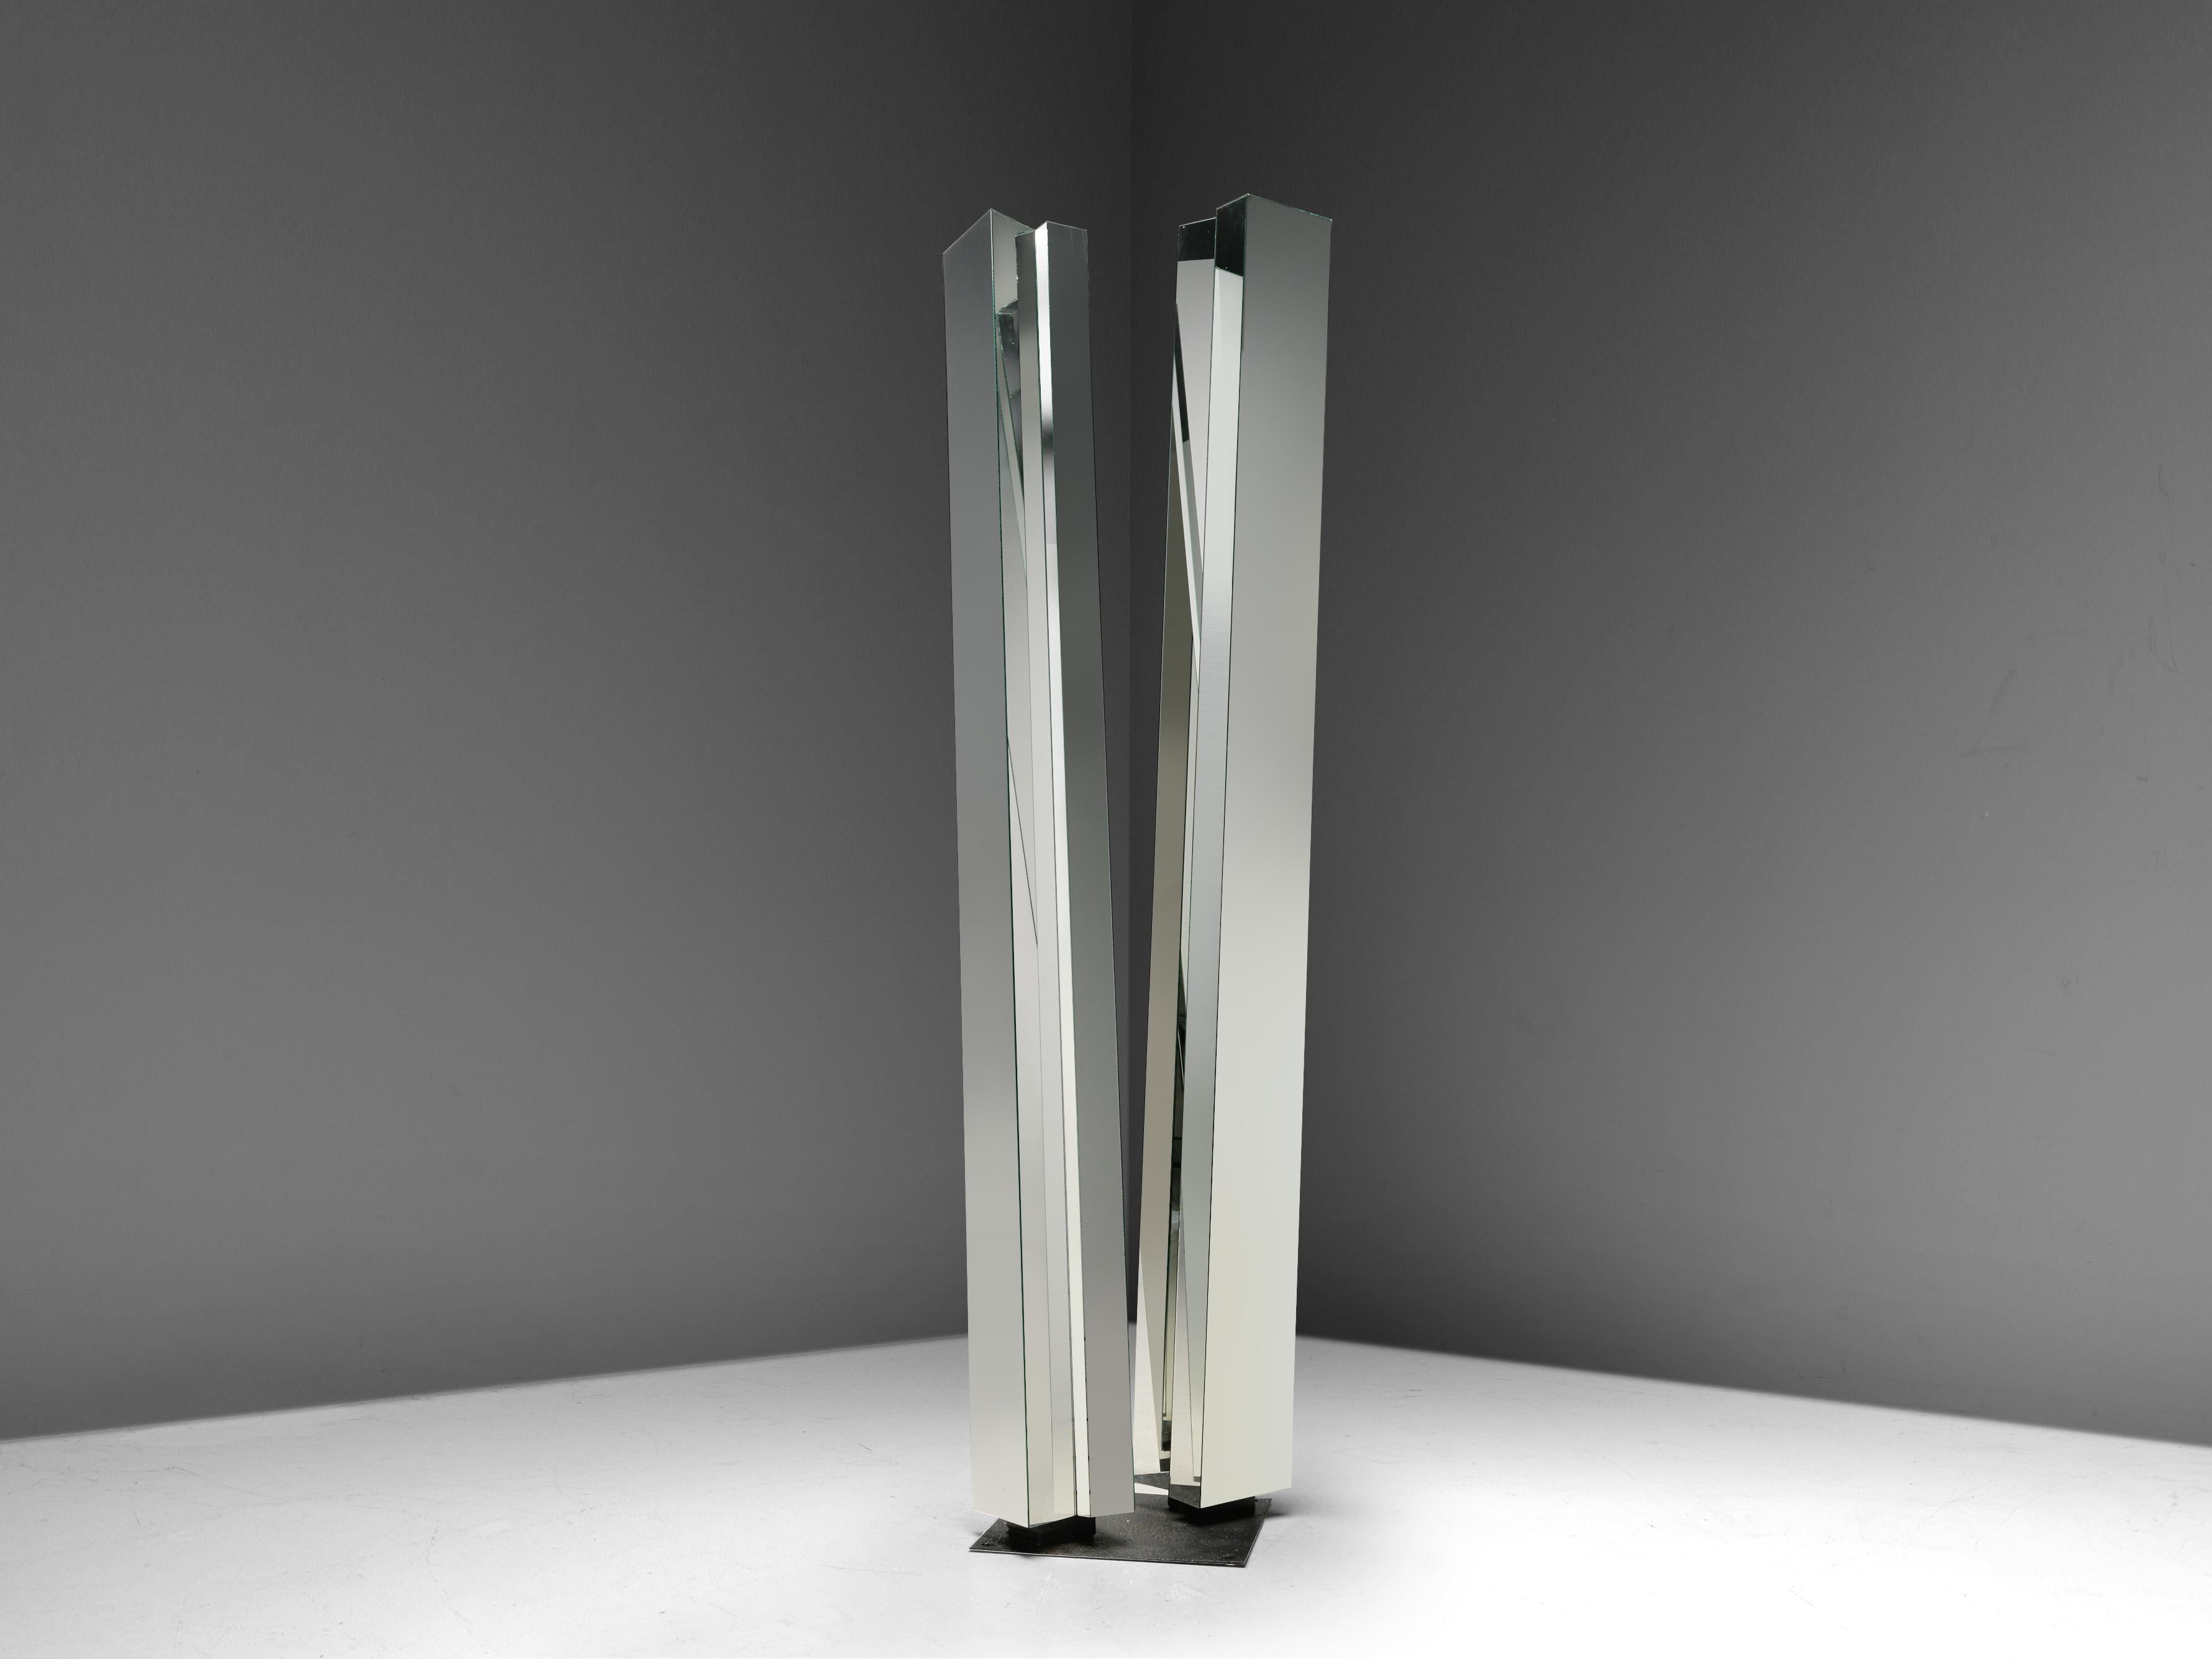 Michel Martens, sculpture, mirrored glass, metal Belgium, 1970s

Belgium artist Michel Martens is famous for his impressive glass art. He created this postmodern piece of art in the 1970s. Two columns rise up from a small metal squared plate. The